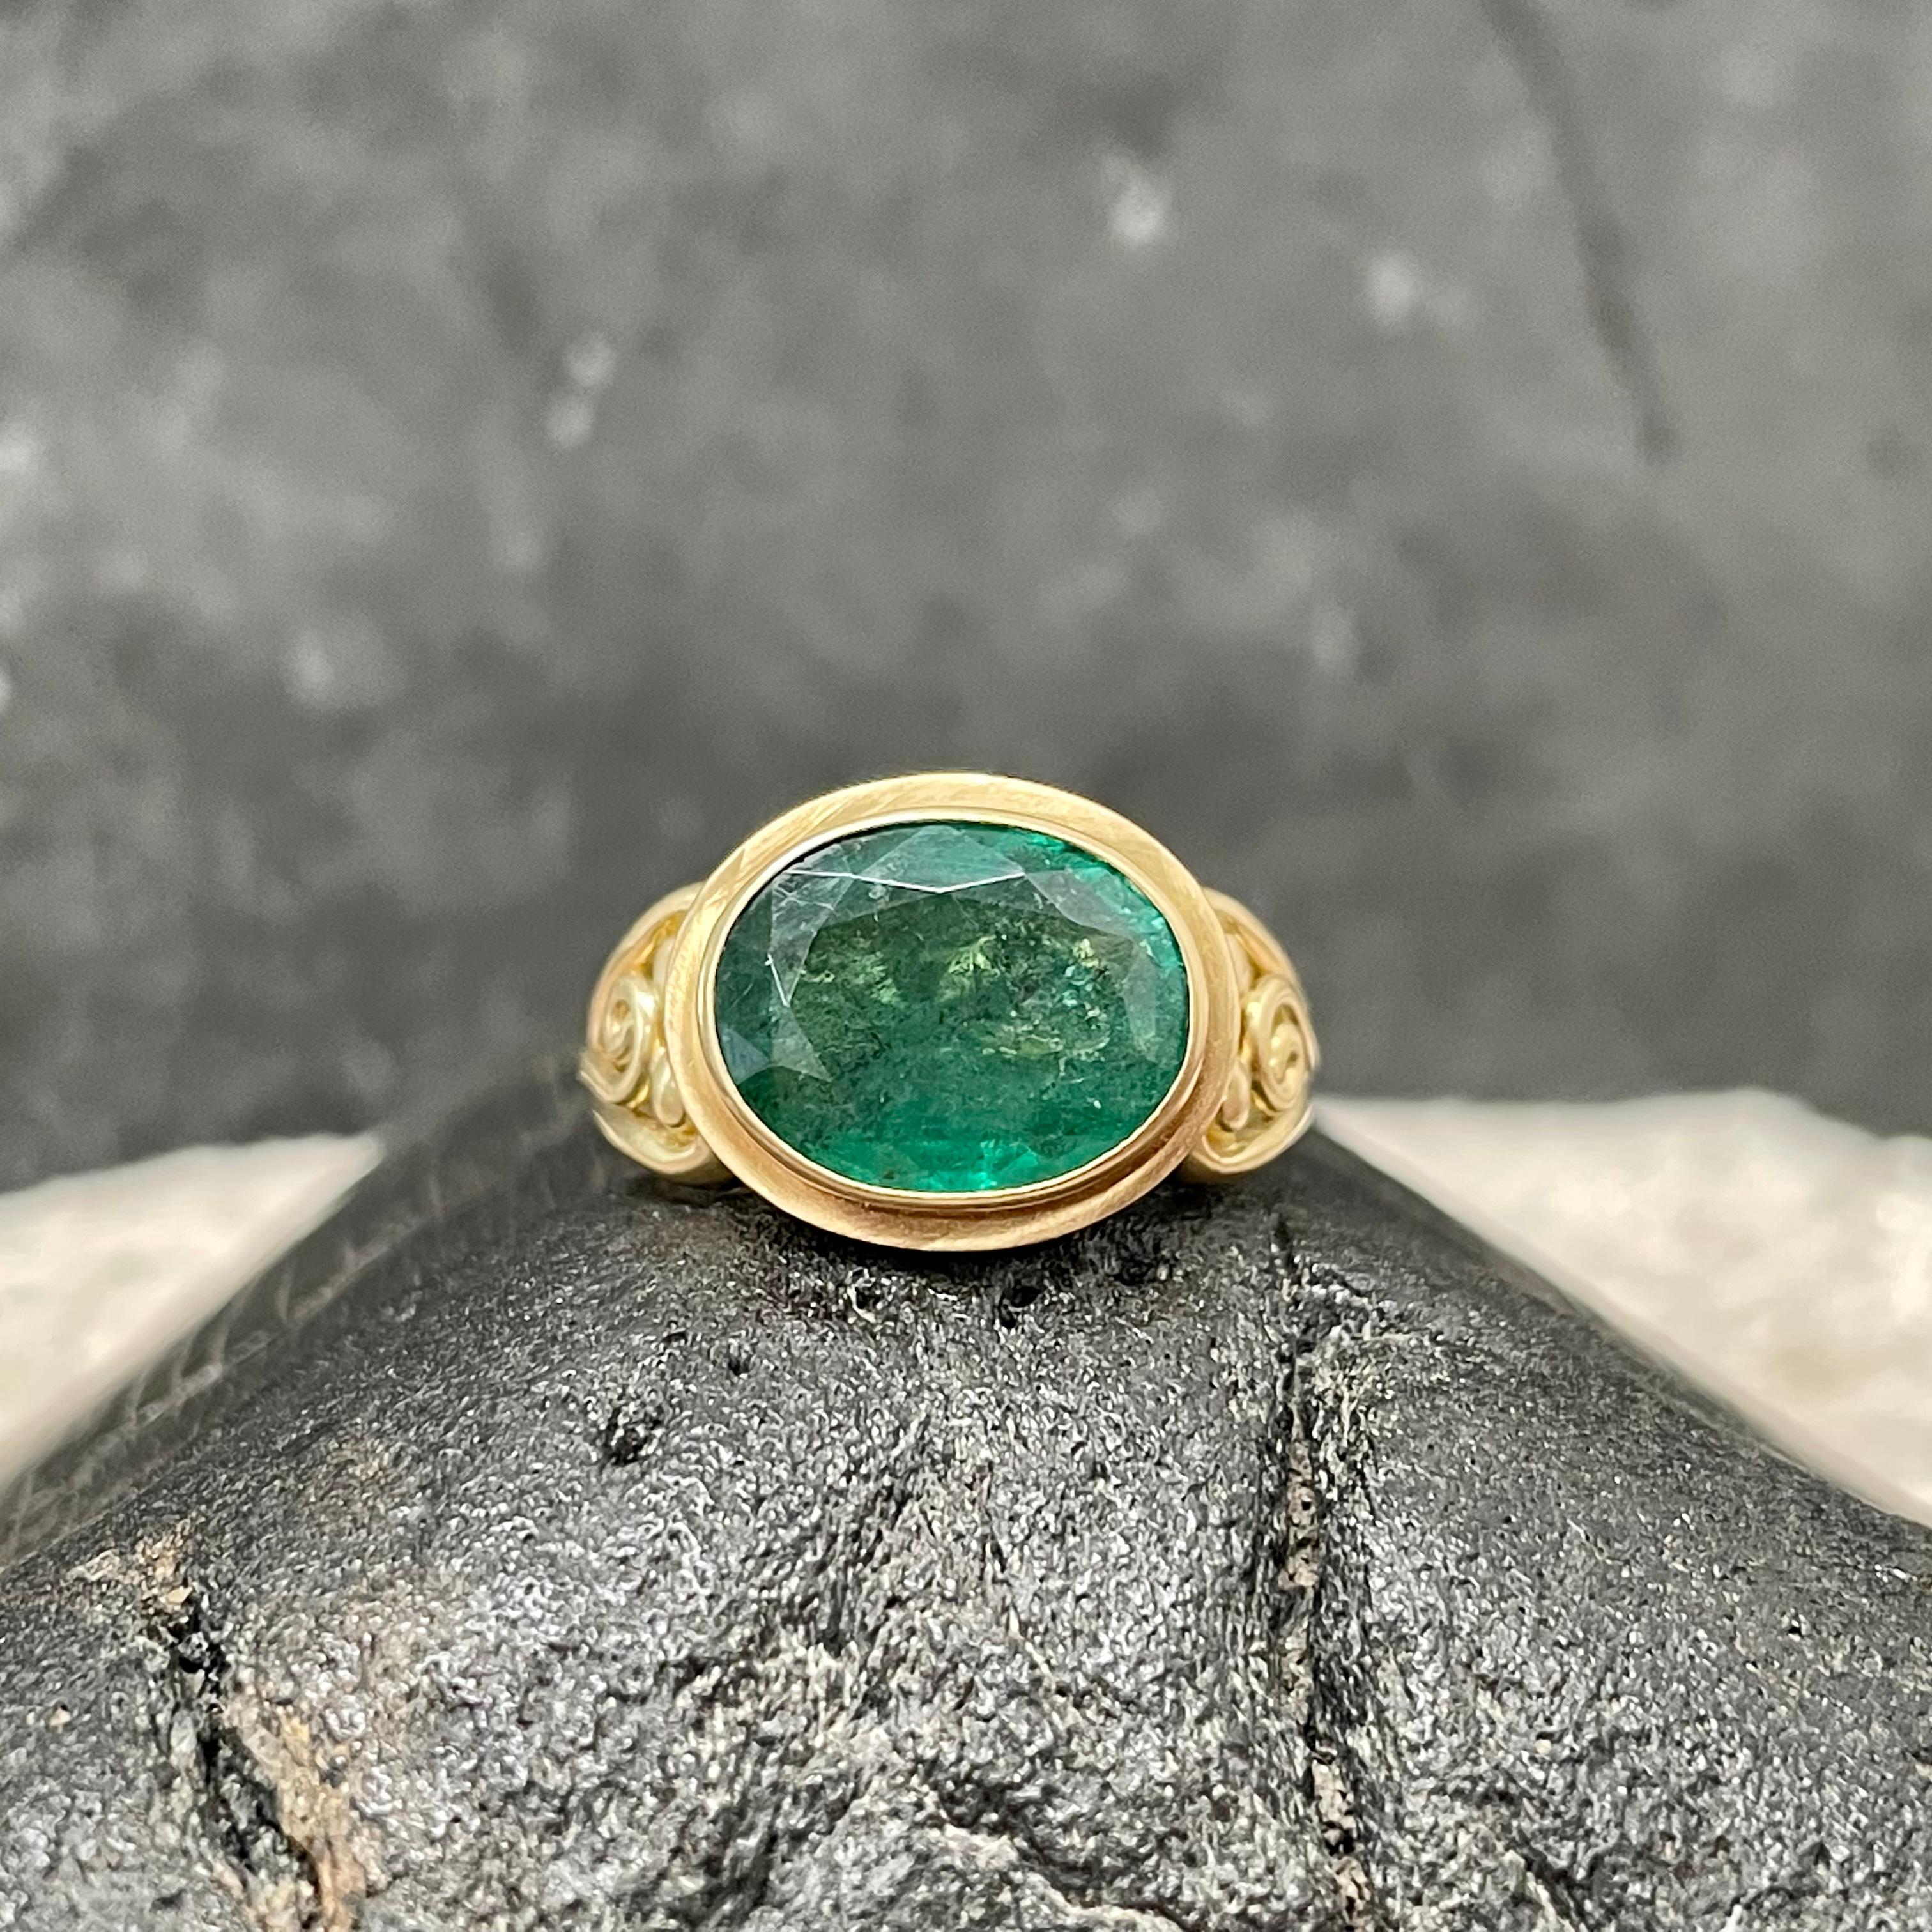 A large 10 x 12 mm oval faceted Zambian emerald rests in a 